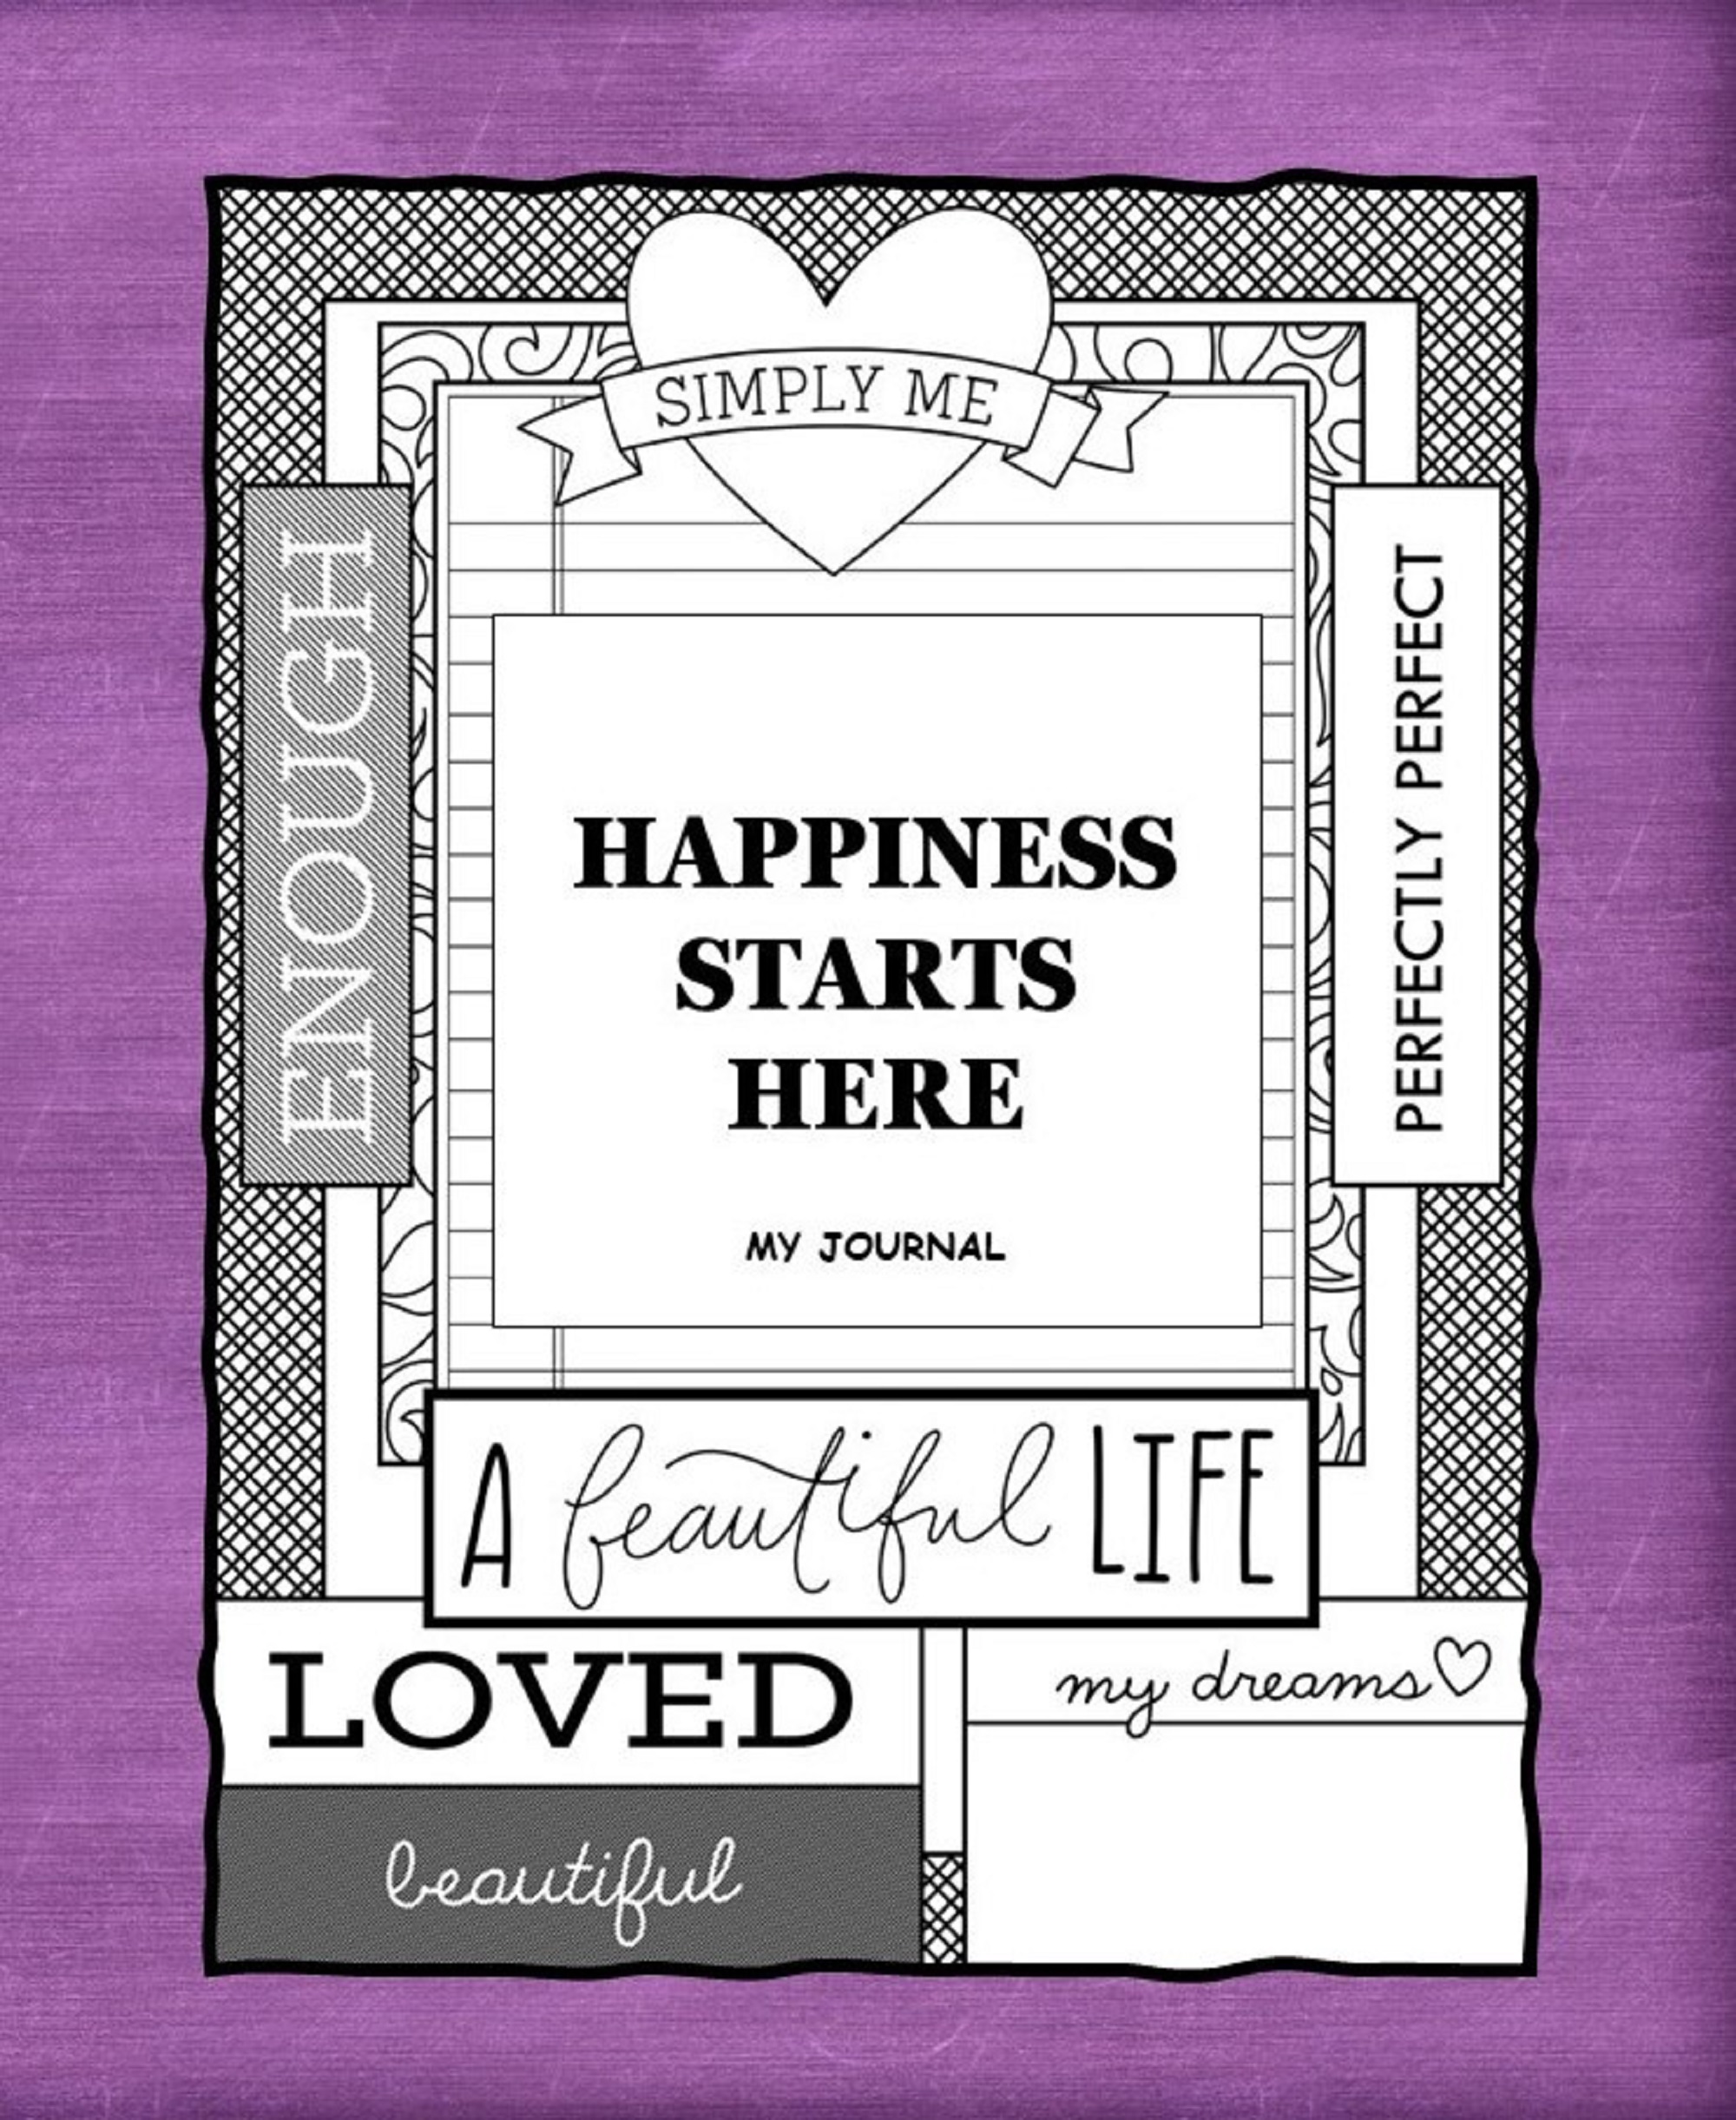 Happiness starts here - journal pages